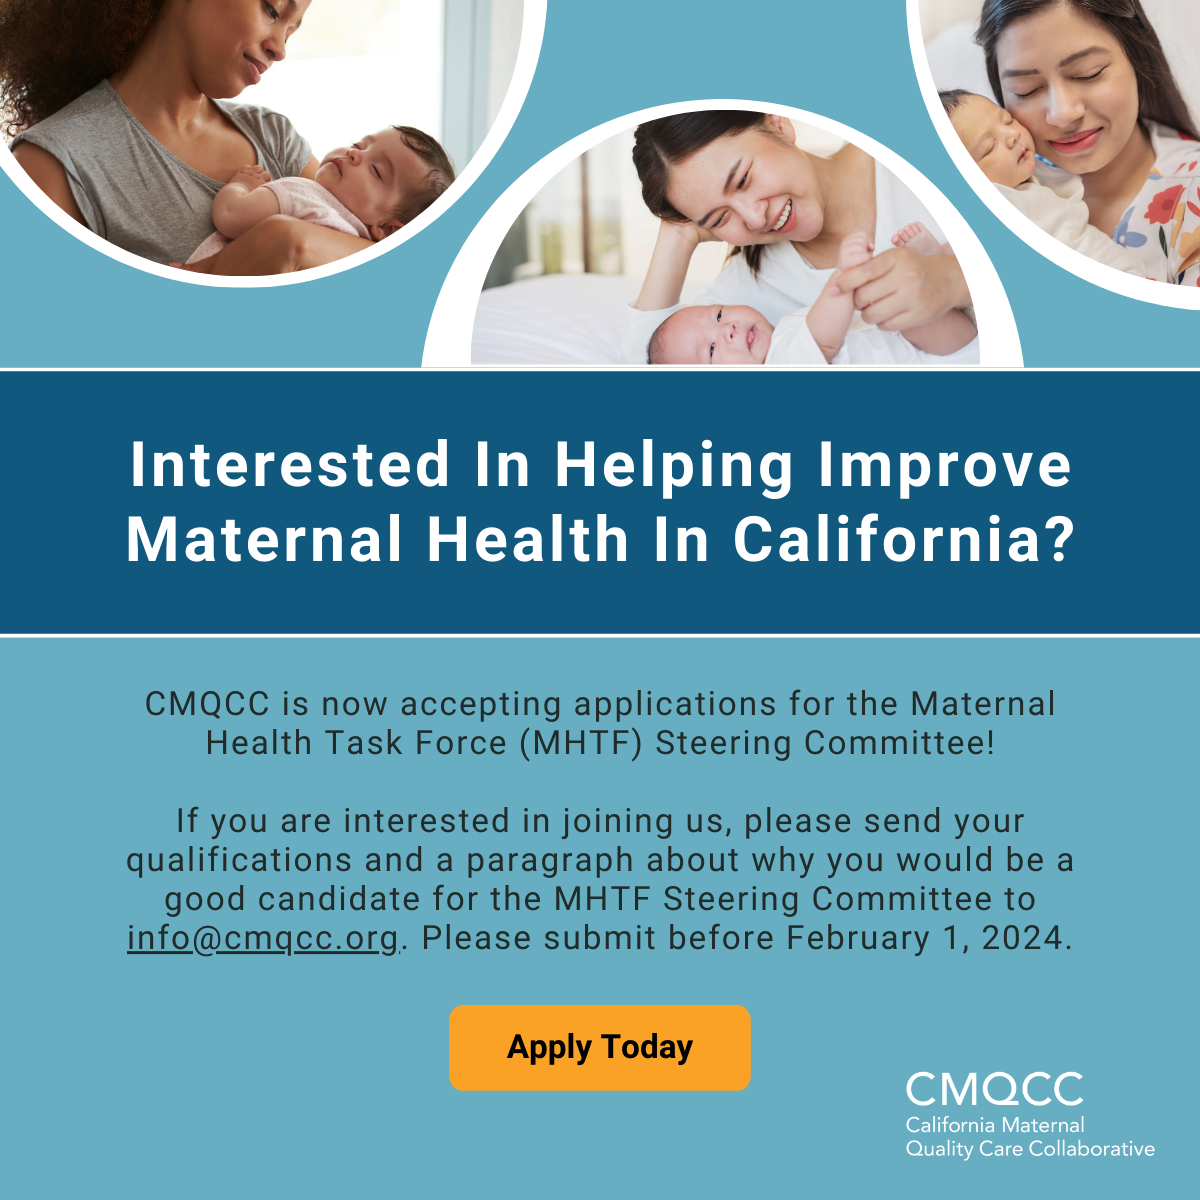 Interested in helping improve maternal health in California? CMQCC is now accepting applications for the Maternal Health Task Force Steering Committee.